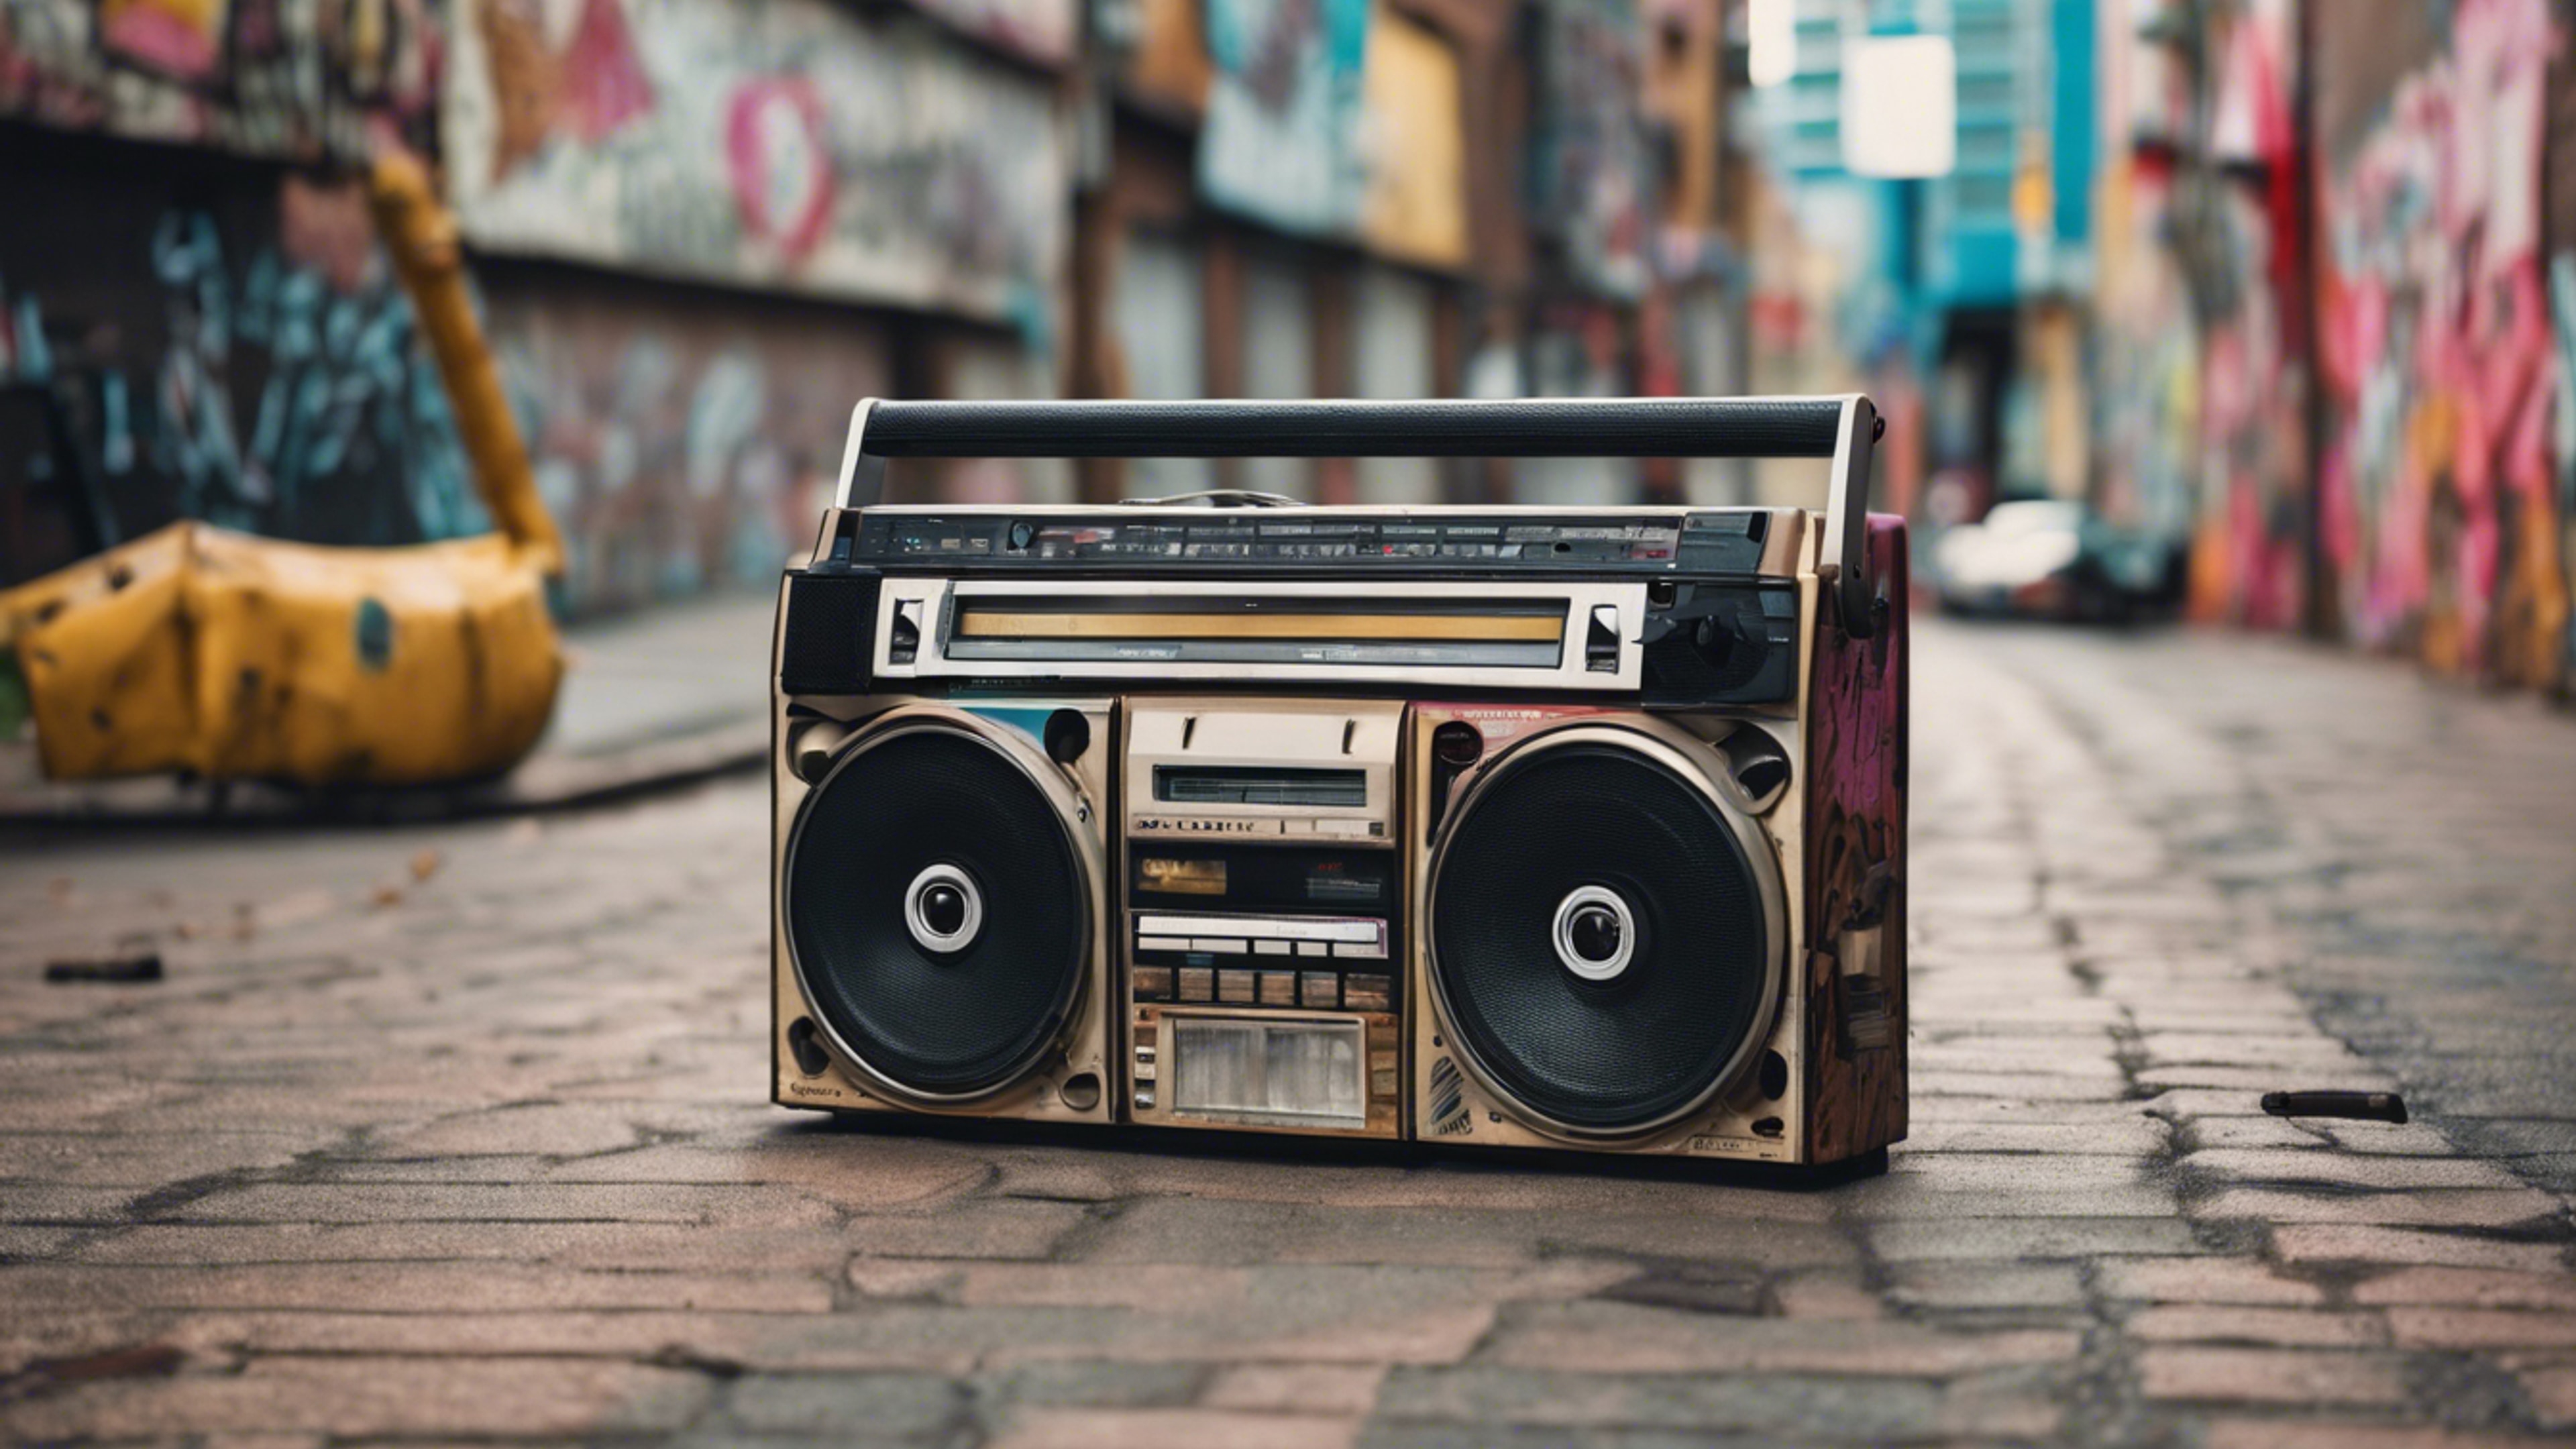 An old school 80s boombox playing cassette tapes on a graffitied street. 벽지[63e13512f9e44708b5c0]